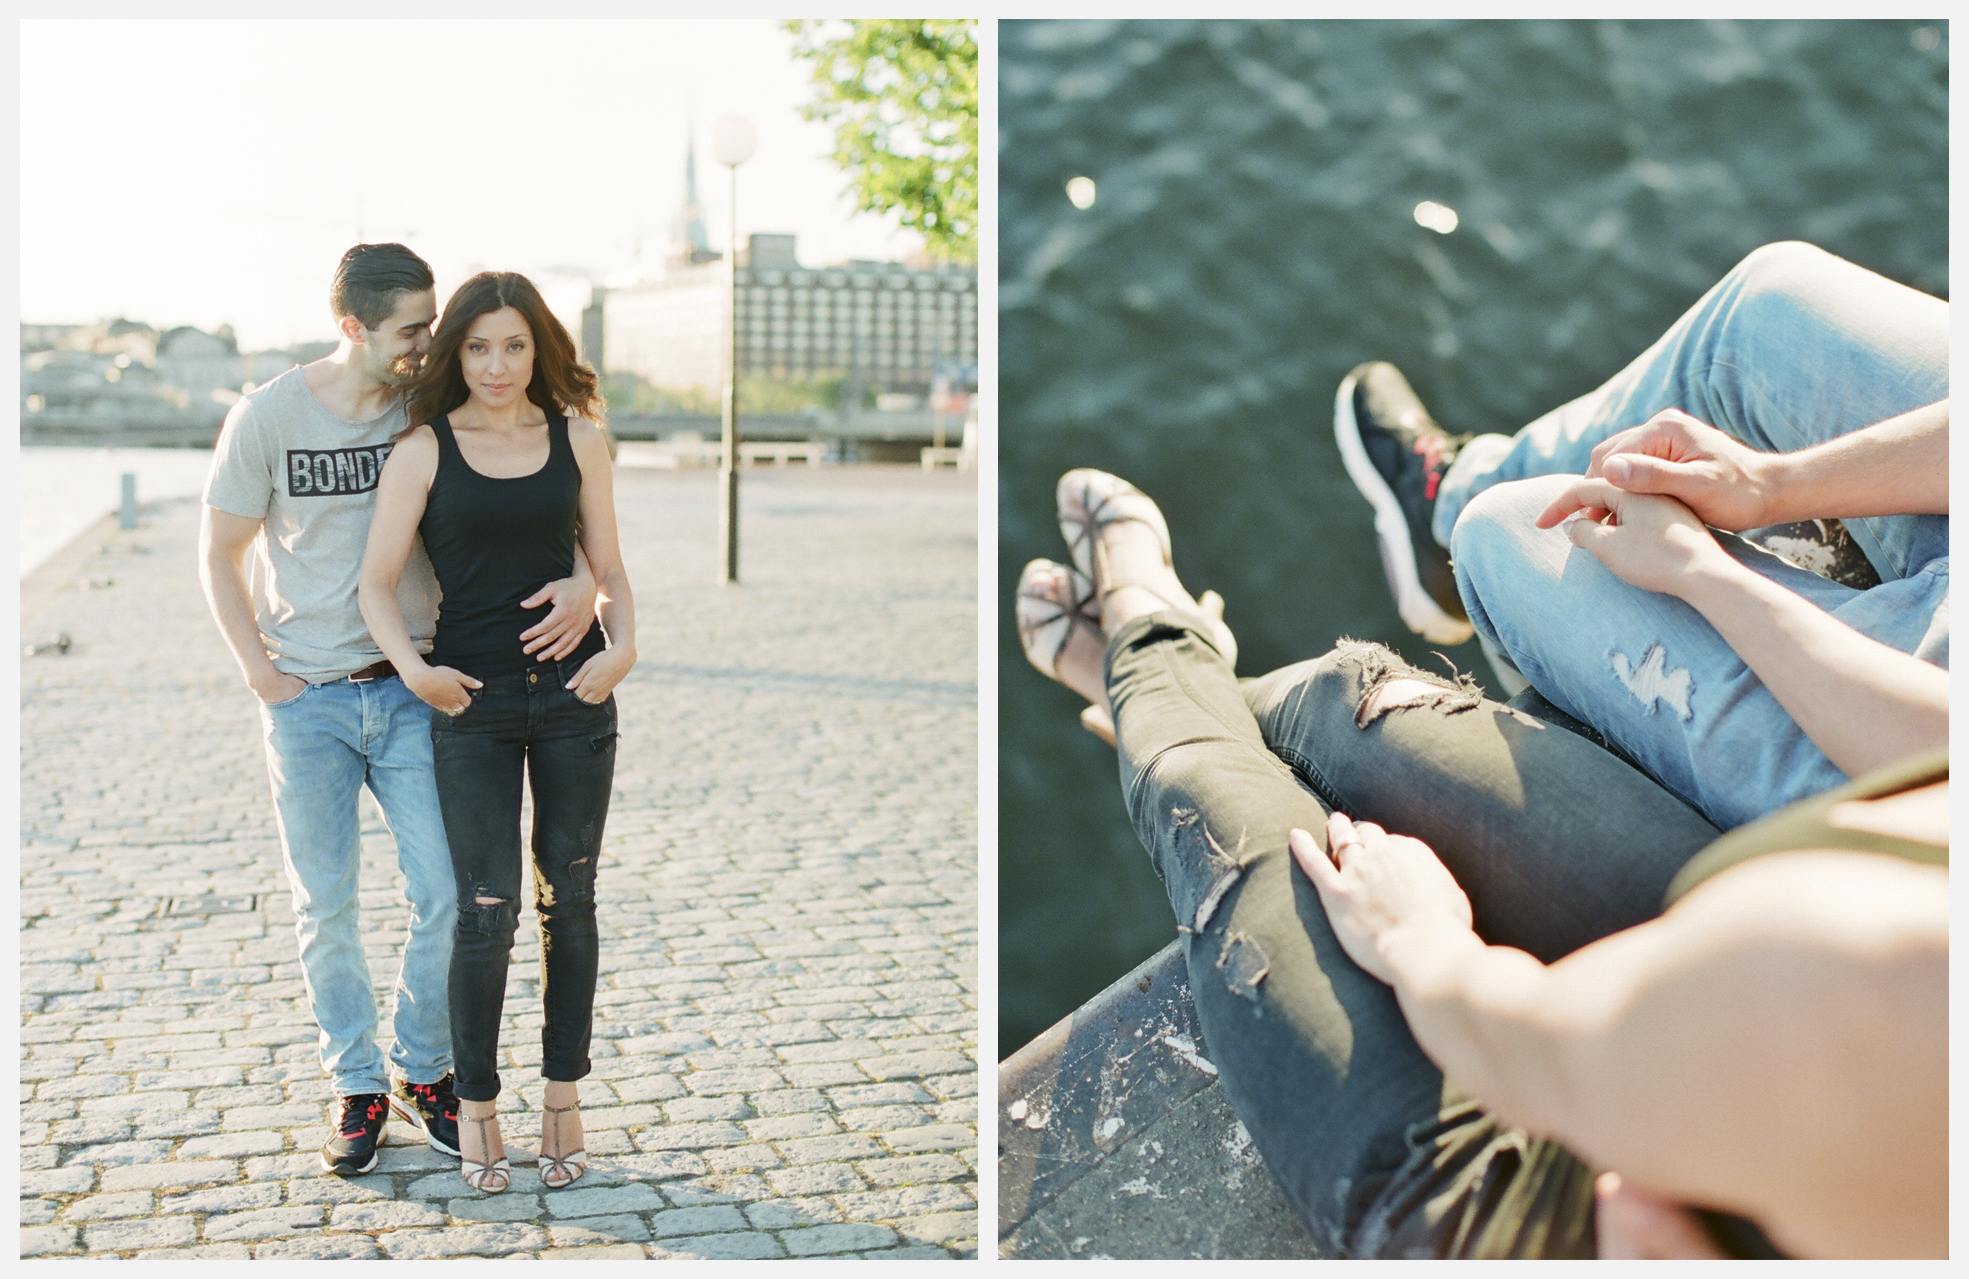 Engagement session from Stockholm, Sweden by New York wedding photographer Alicia Swedenborg